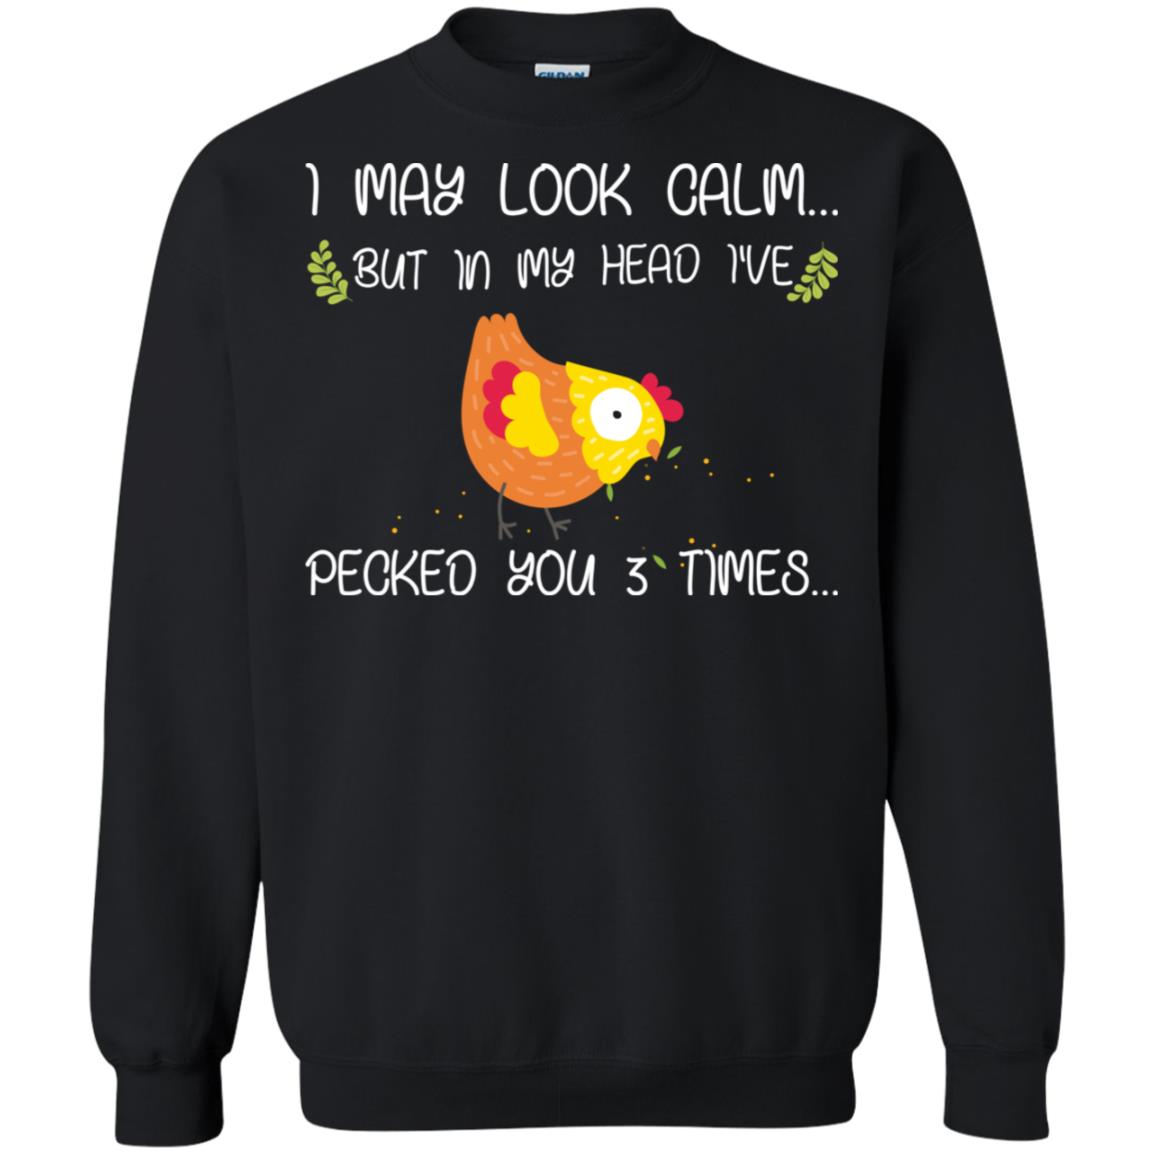 I May Look Calm But In My Head I've Pecked You 3 Times Best Quote ShirtG180 Gildan Crewneck Pullover Sweatshirt 8 oz.